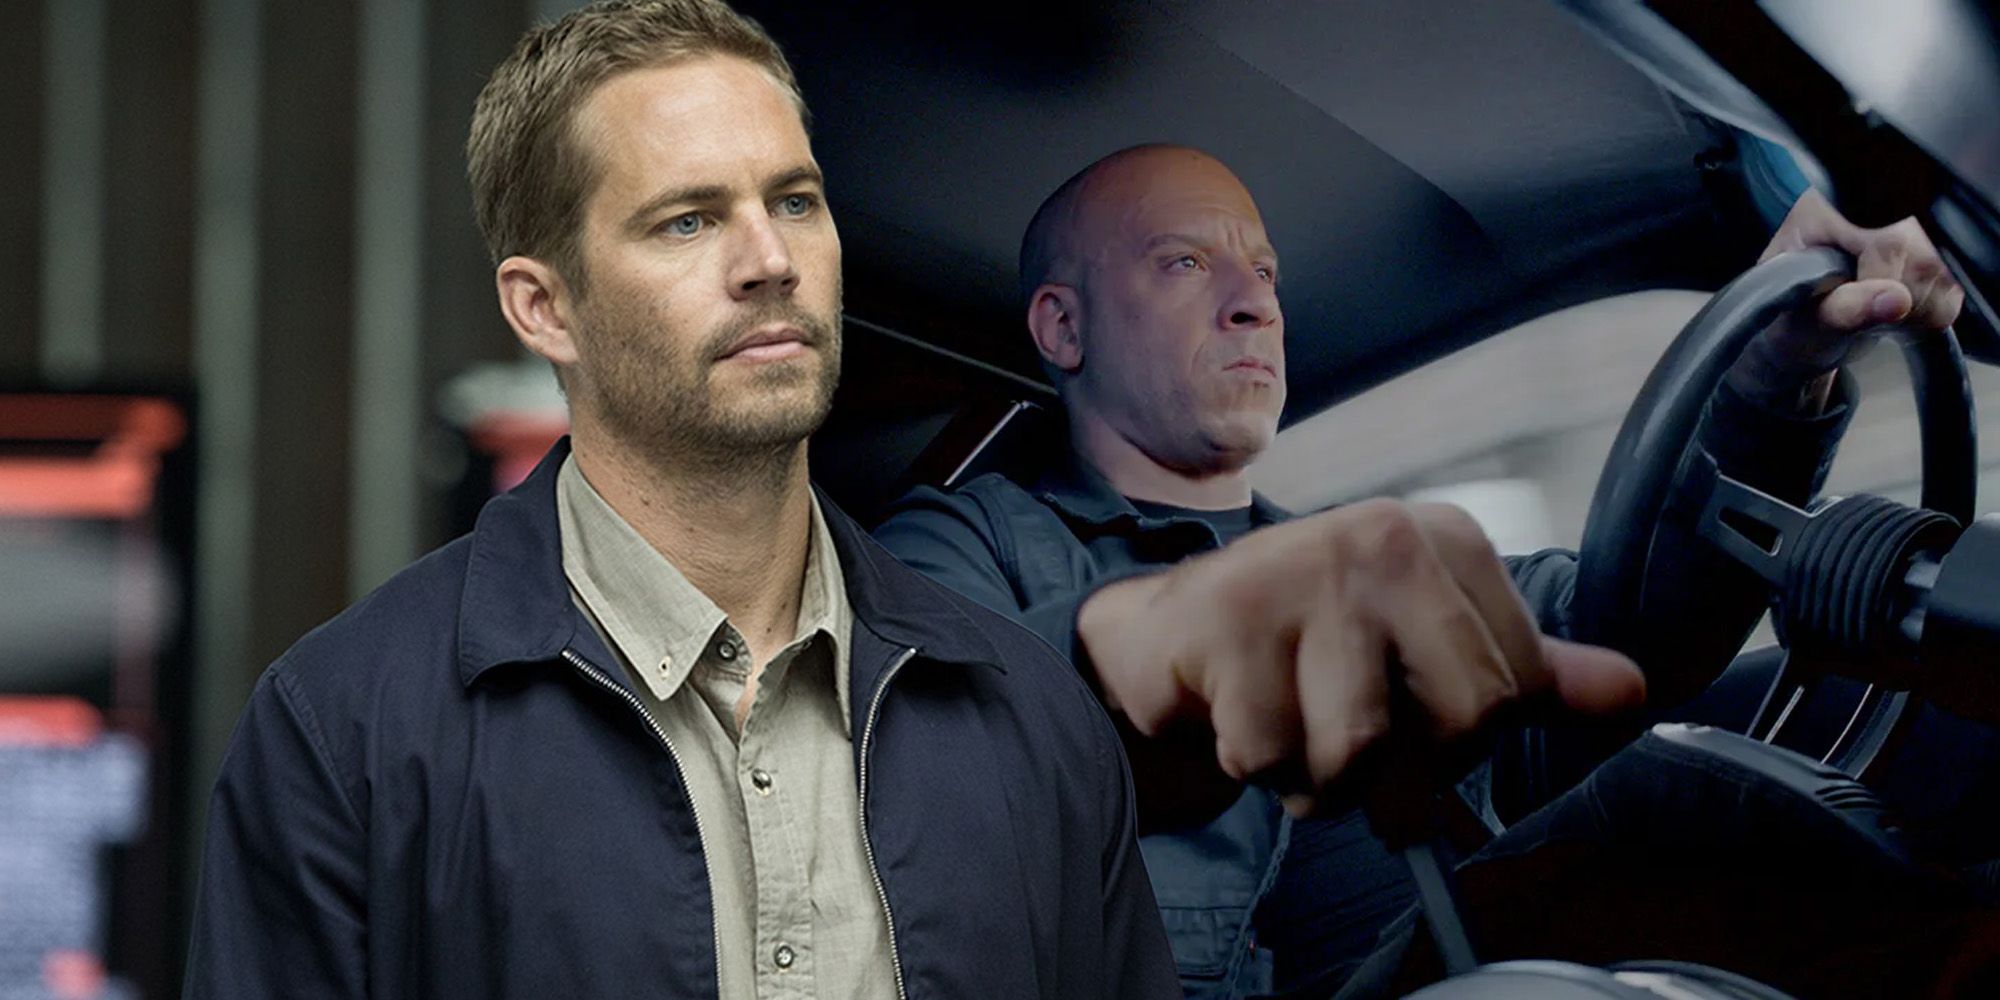 Paul Walker Brian Oconner Dominic Toretto Fast and furious